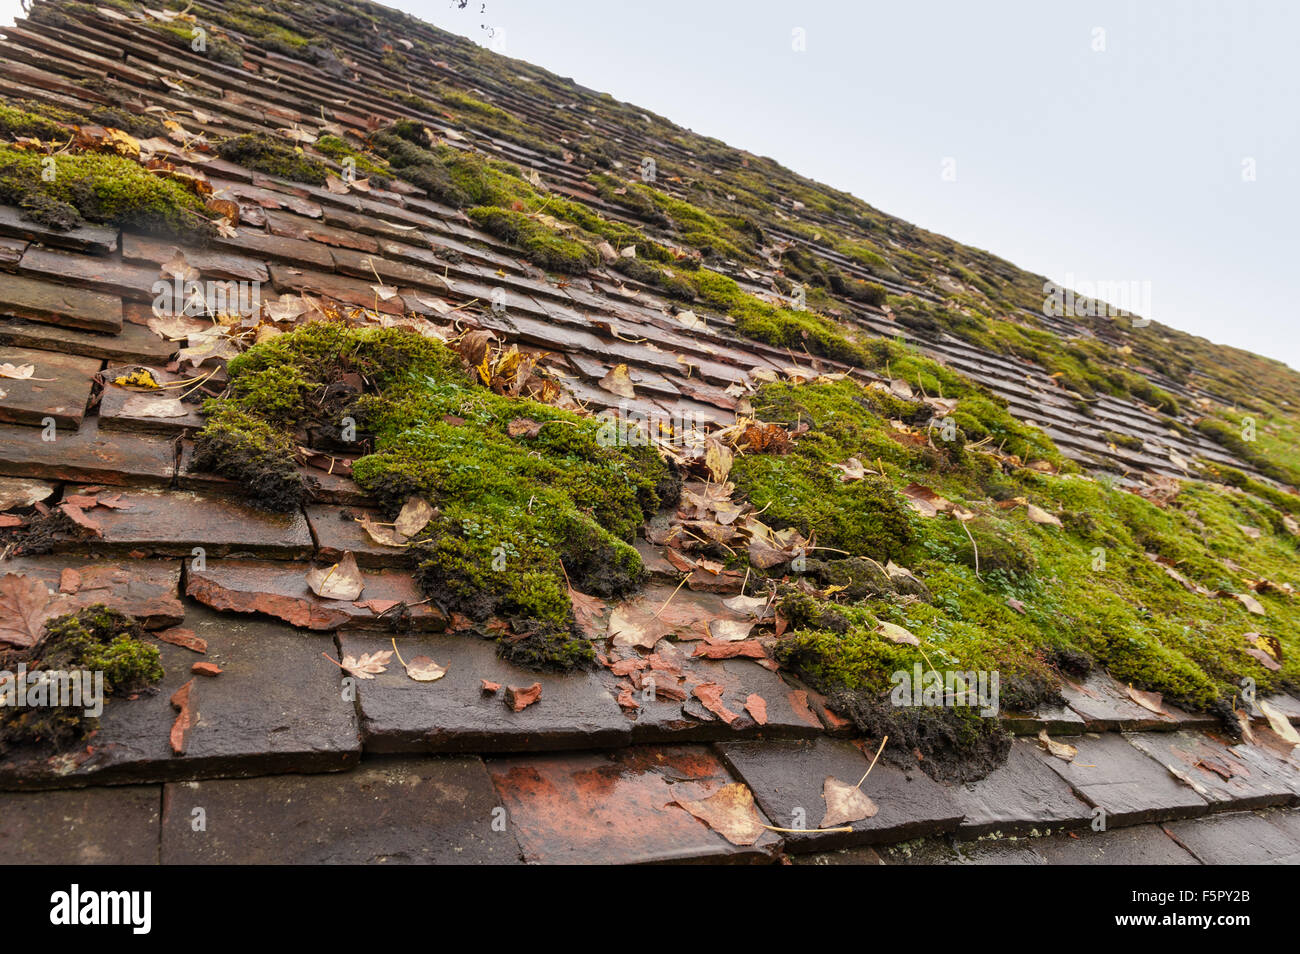 Old barn house roof coated in a thick layer of moss retaining water and dampness after rain shower leaking clay tiles Stock Photo